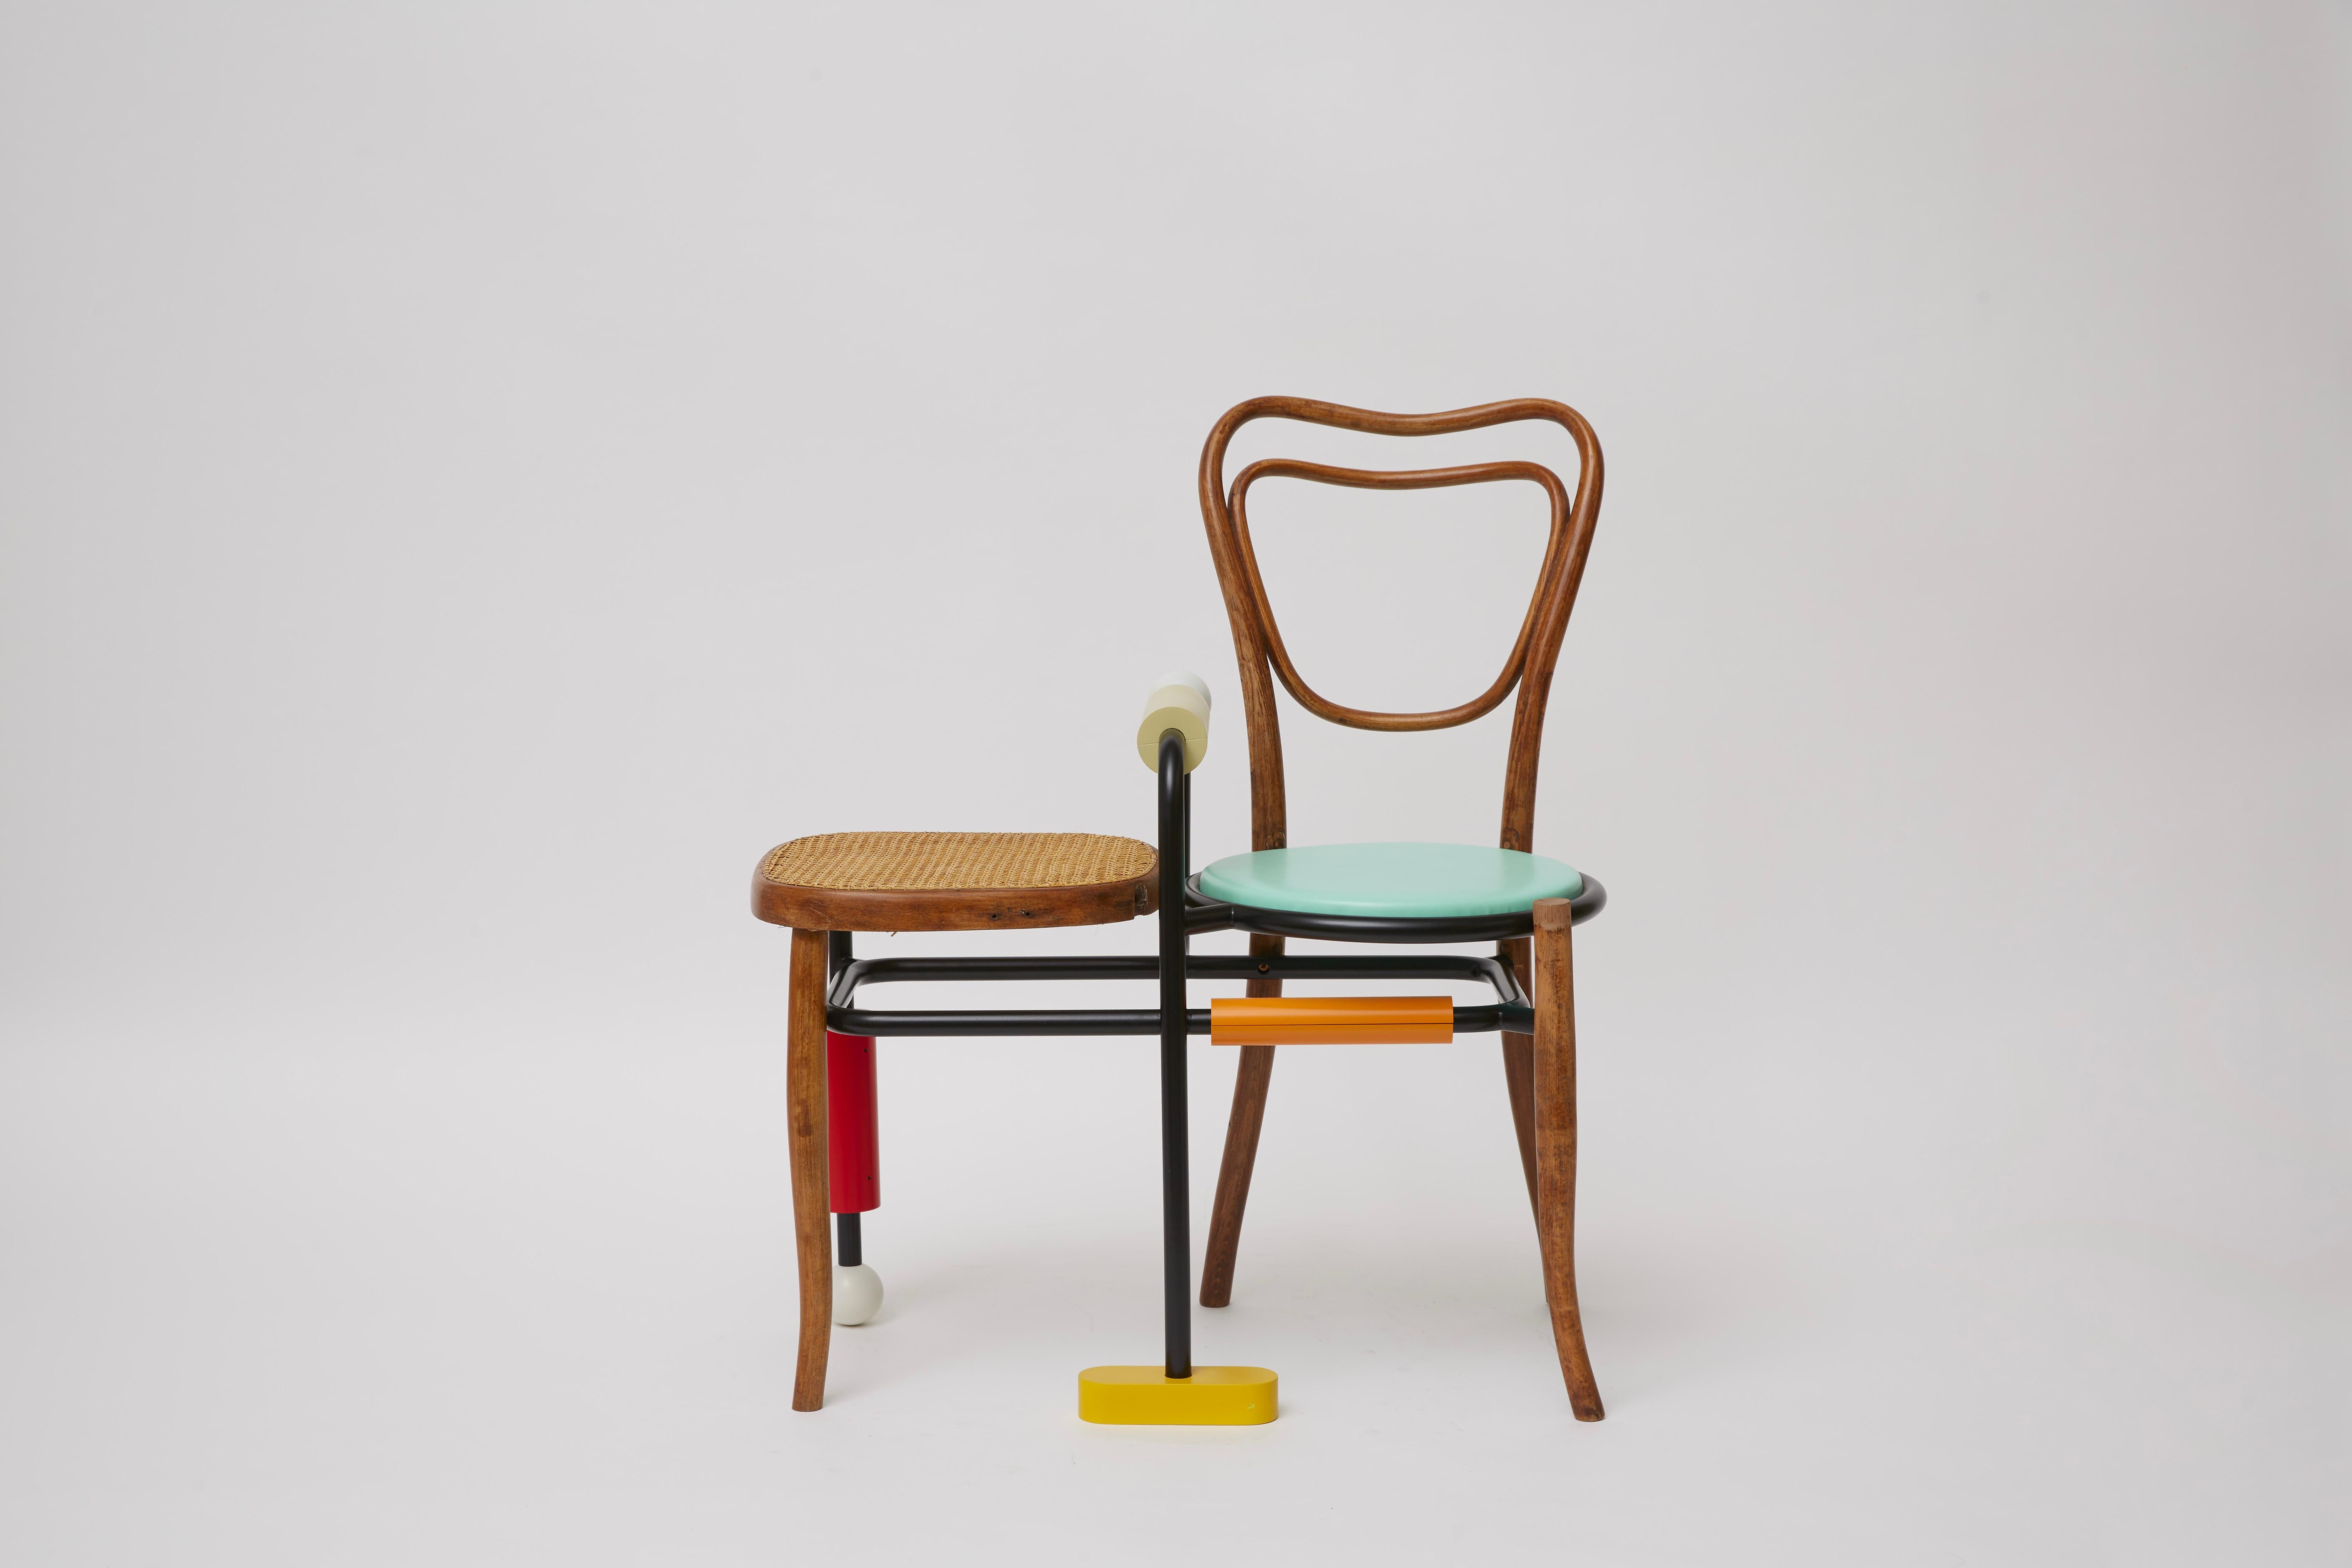 Part of the Morse Clash Collection of designs developed having in mind the eponymous language made of dots and dashes, this Thonet-style wooden chair incorporates a side table and structural elements in tubular steel with red, yellow, and light-blue